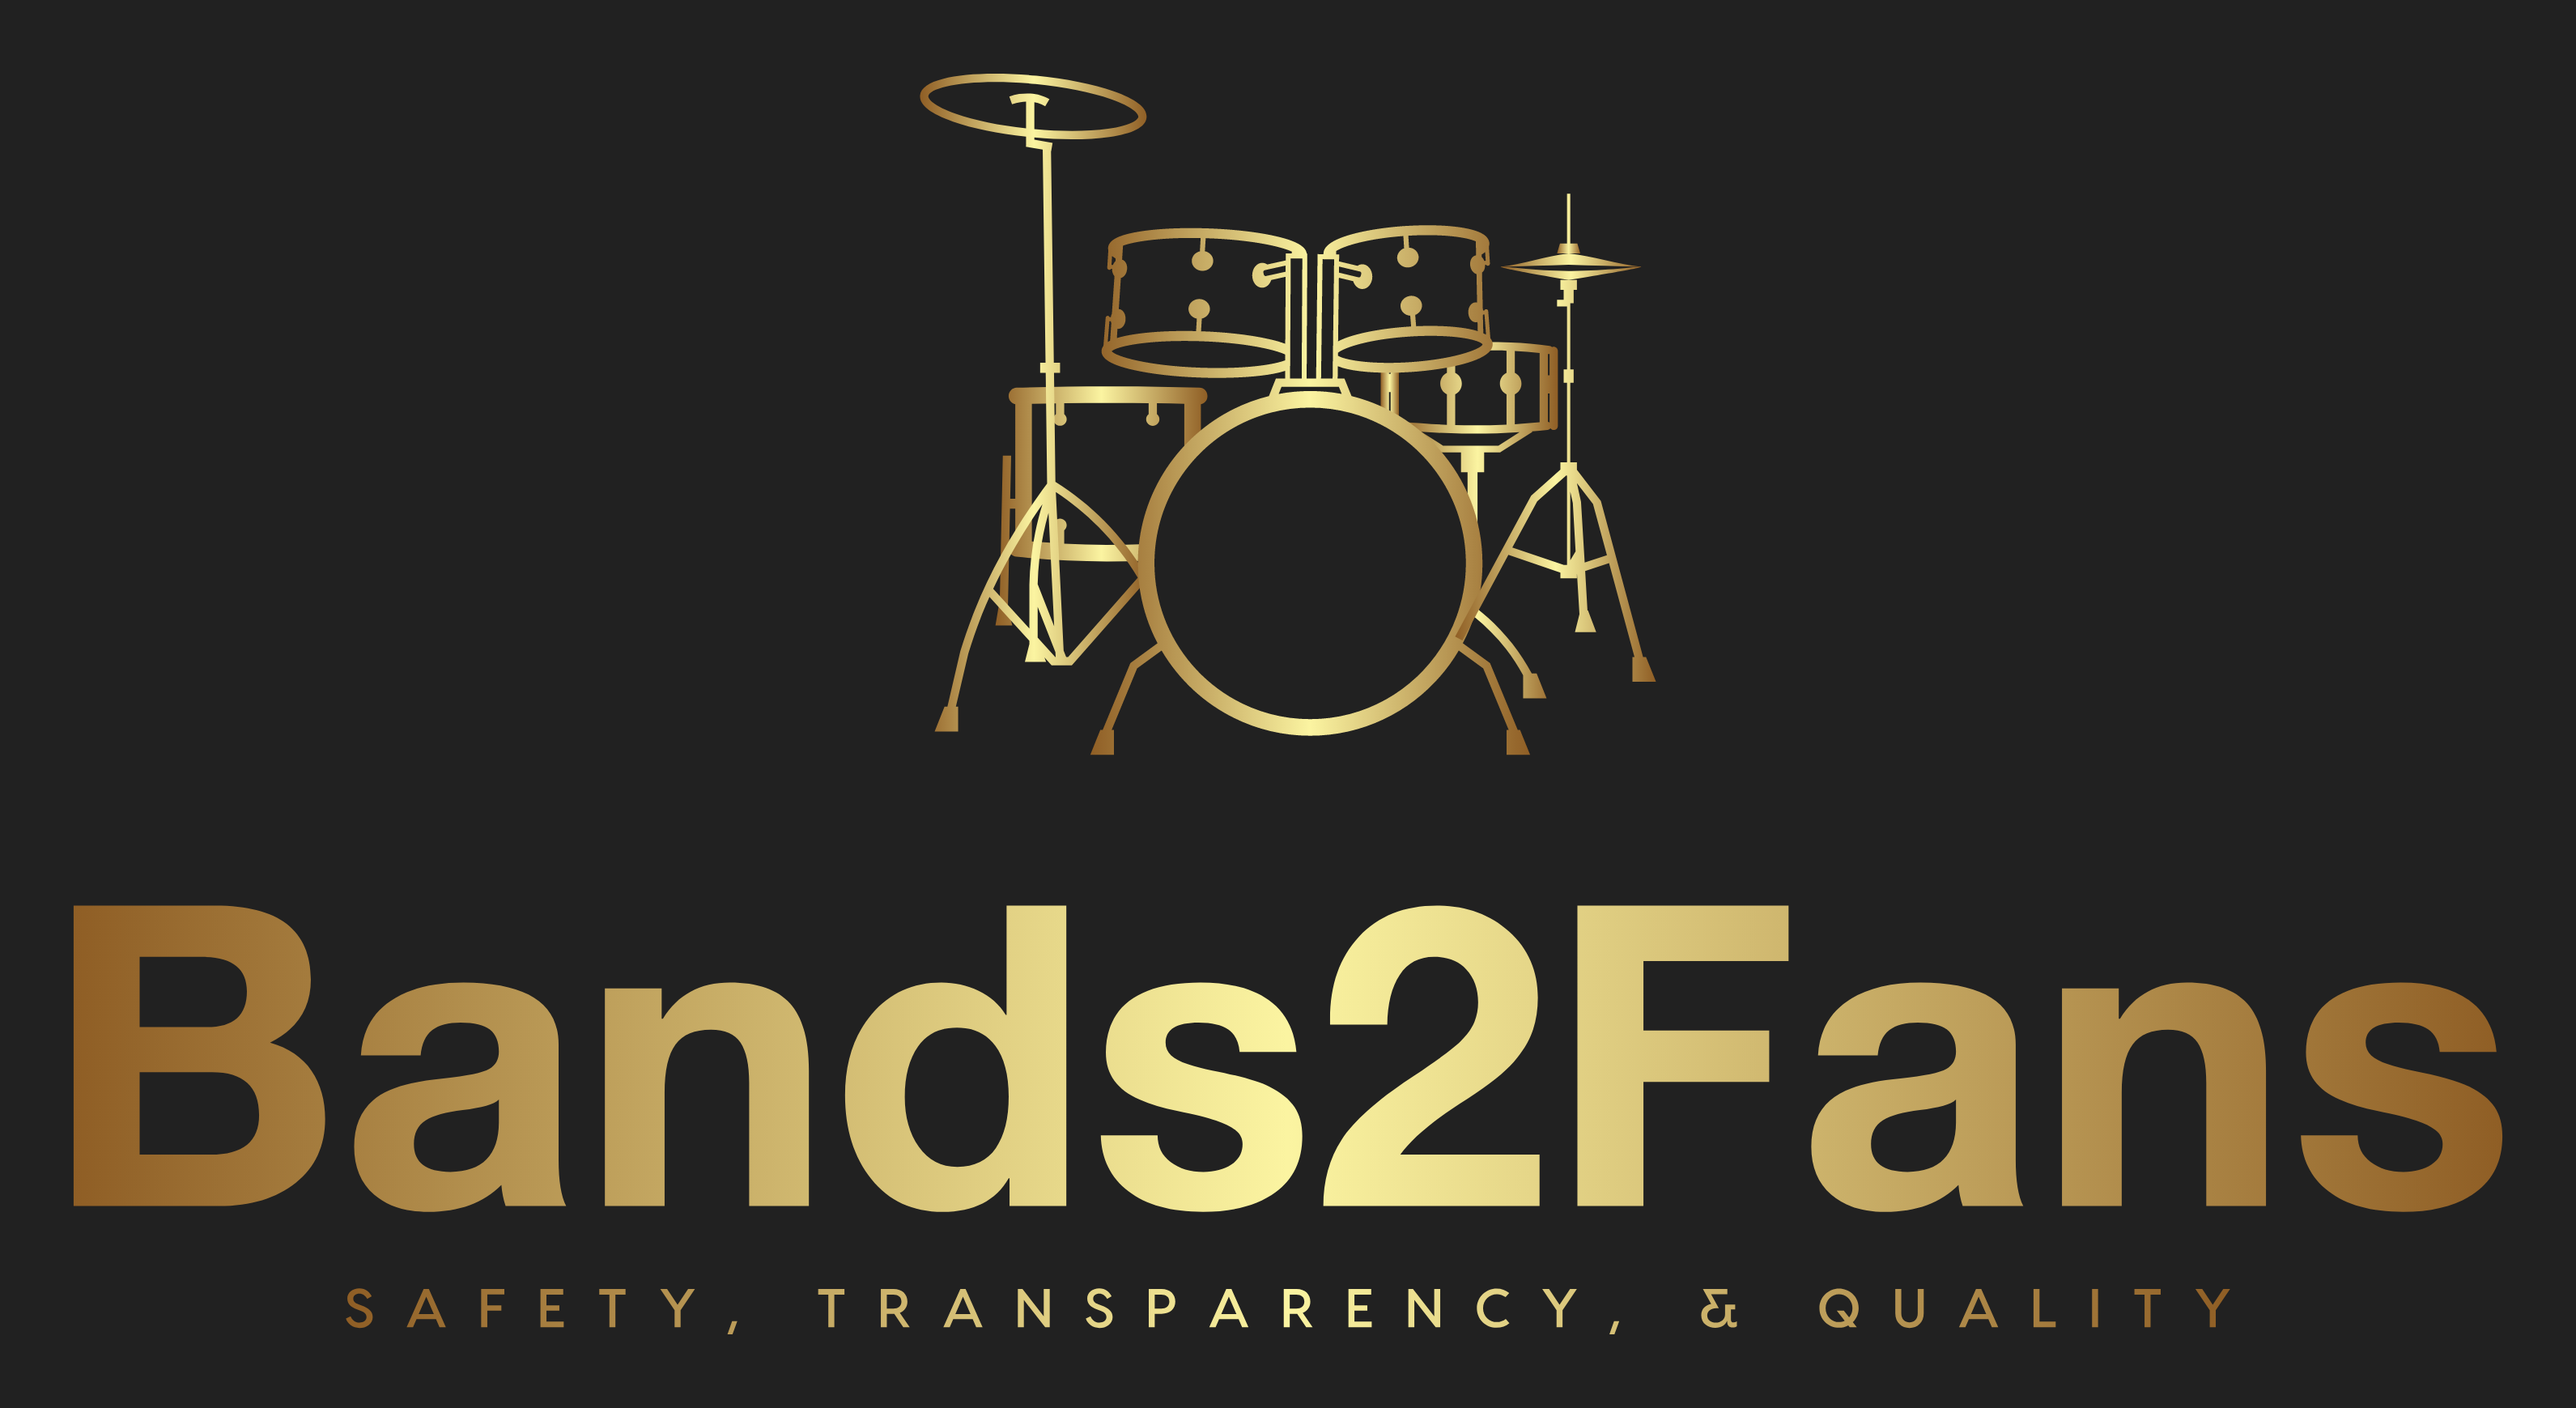 Introducing Bands2Fans: New Live Stream Series from Asheville, NC